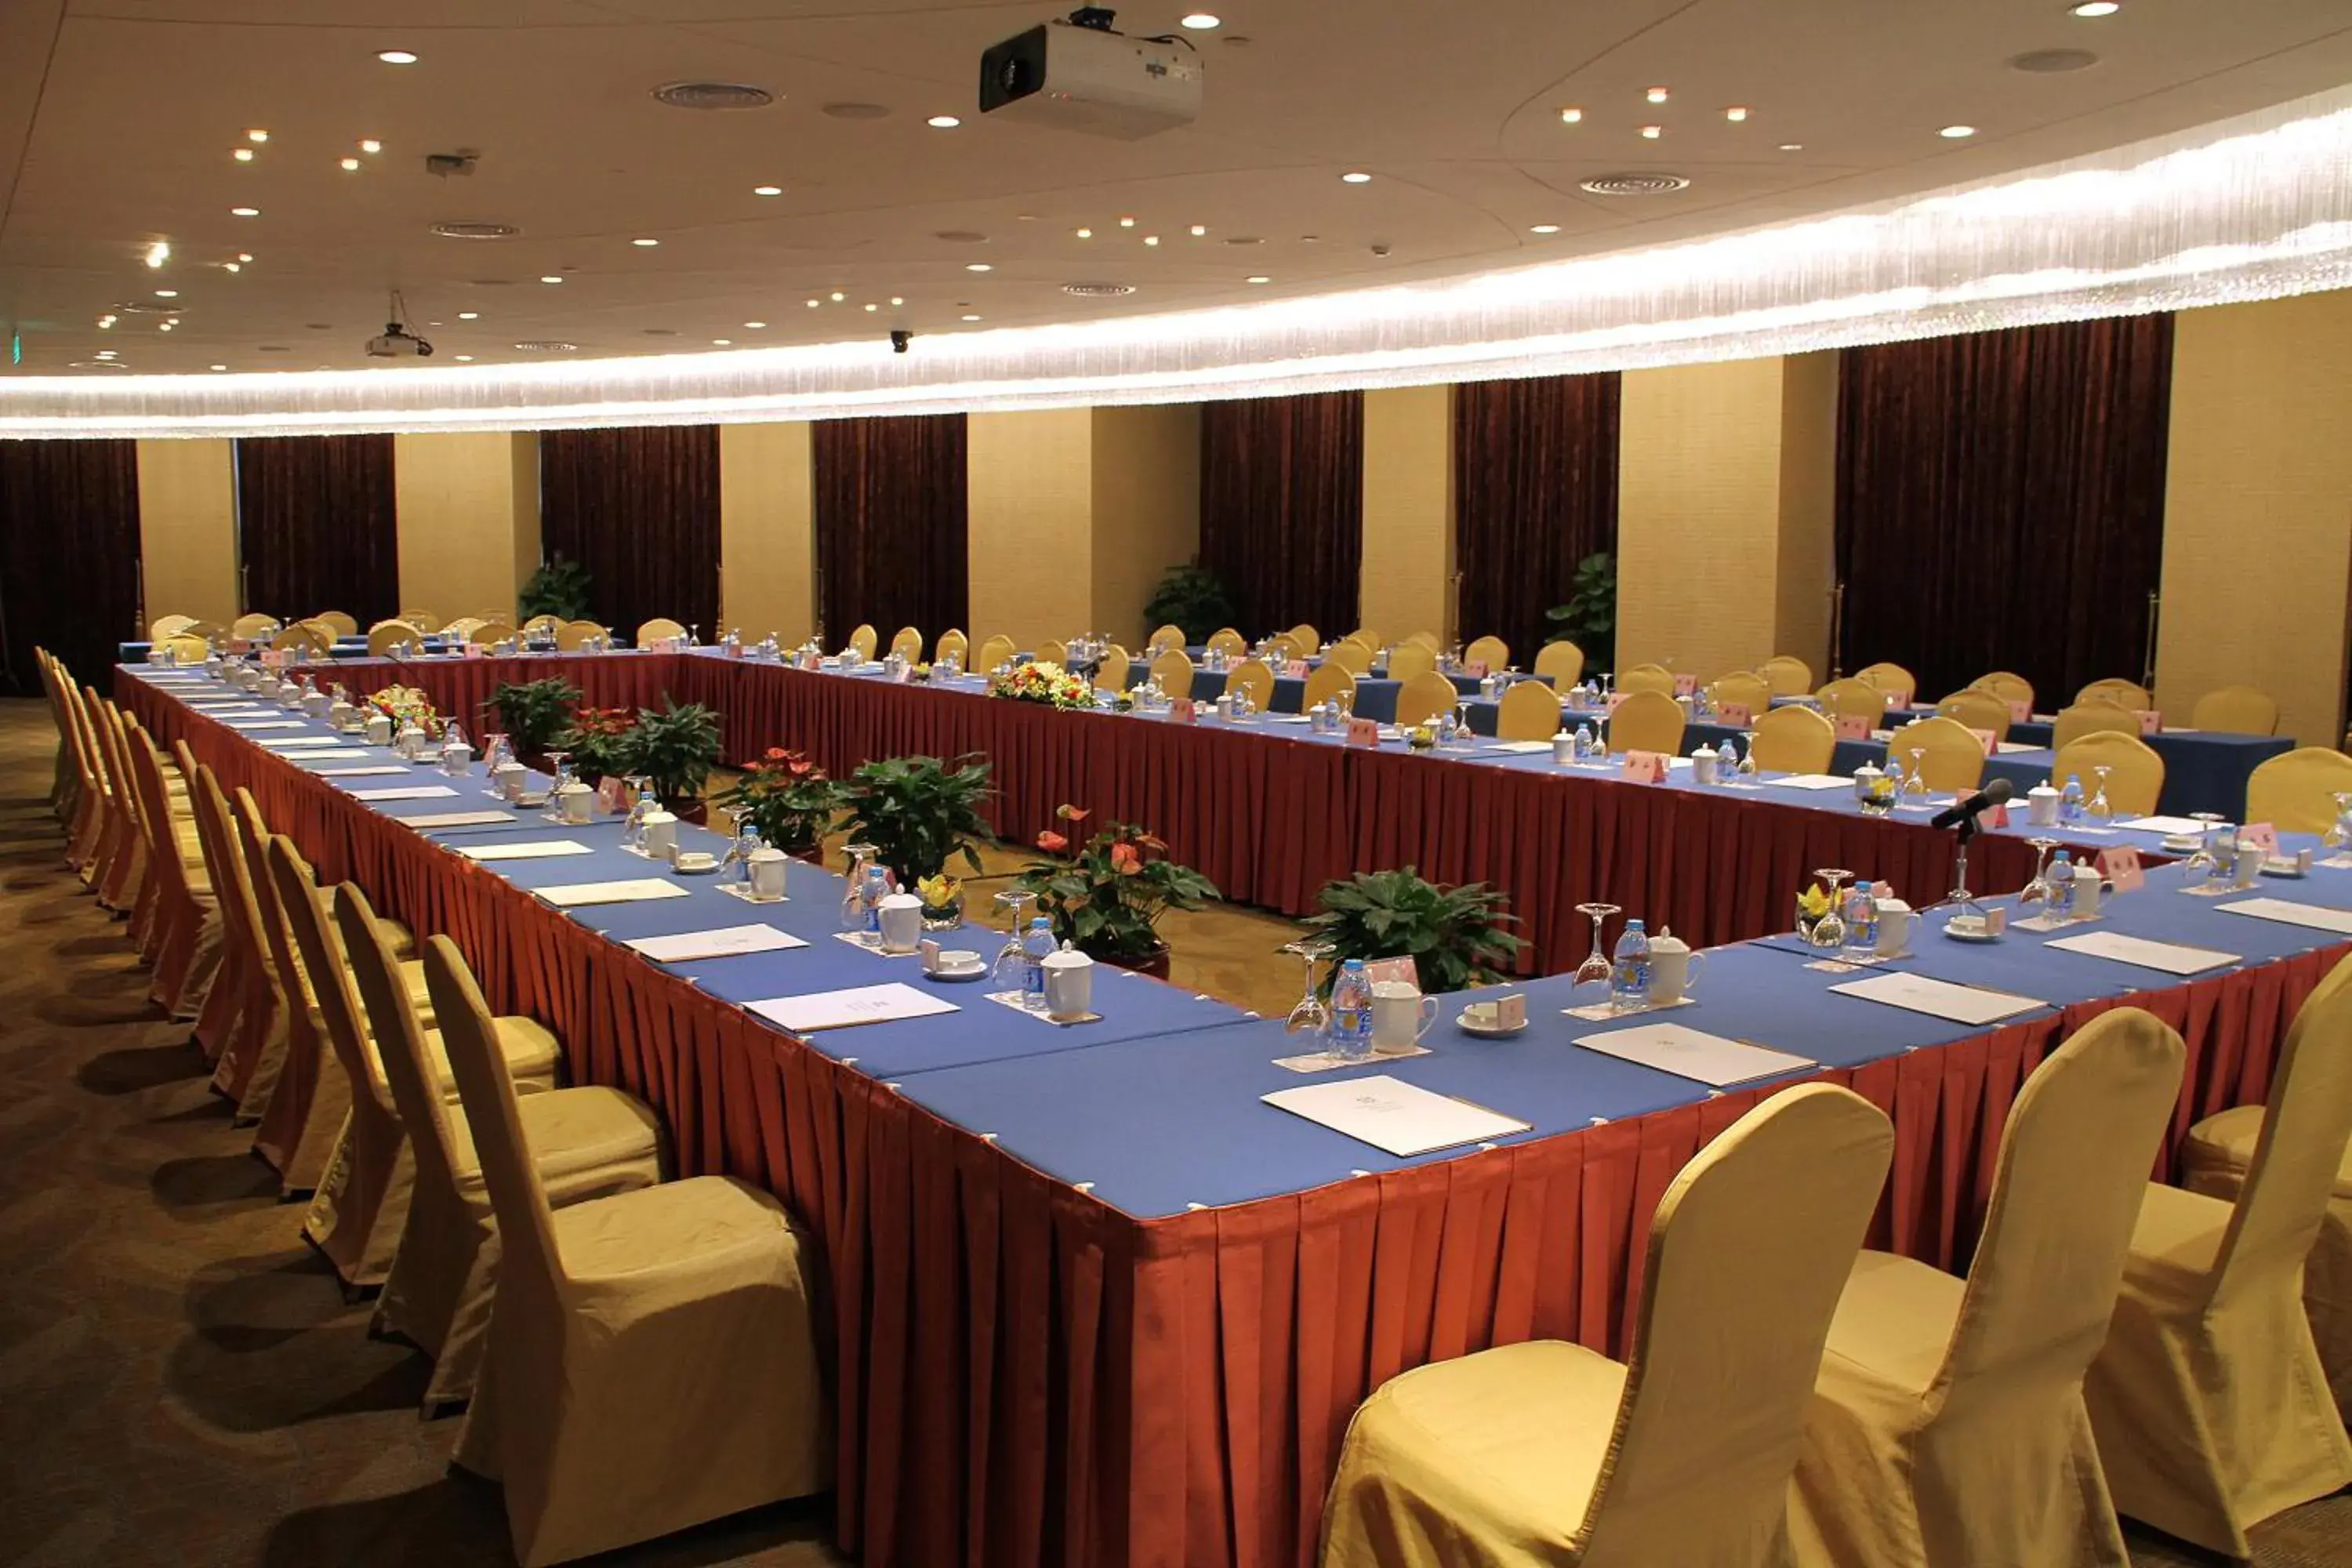 Business facilities in Central Hotel